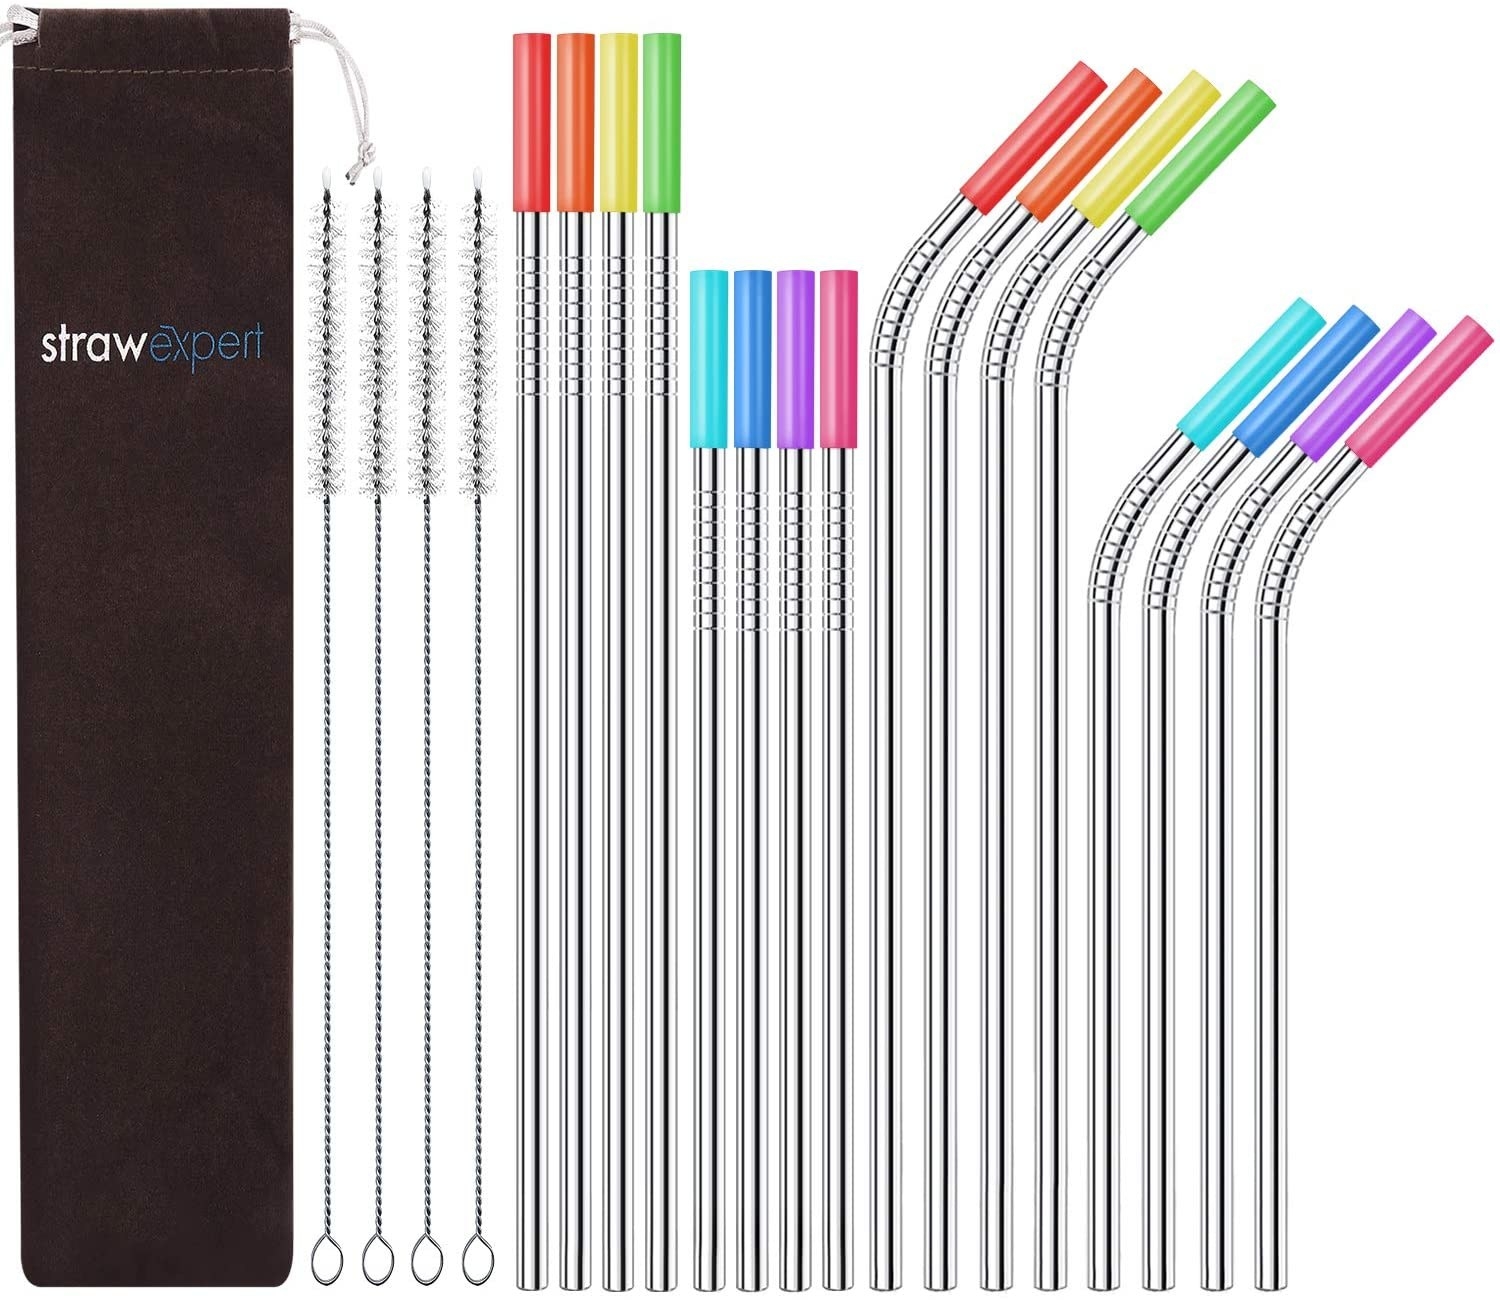 Product shot of 16 stainless steel straws with silicone tips, four cleaning brushes, and a travel case